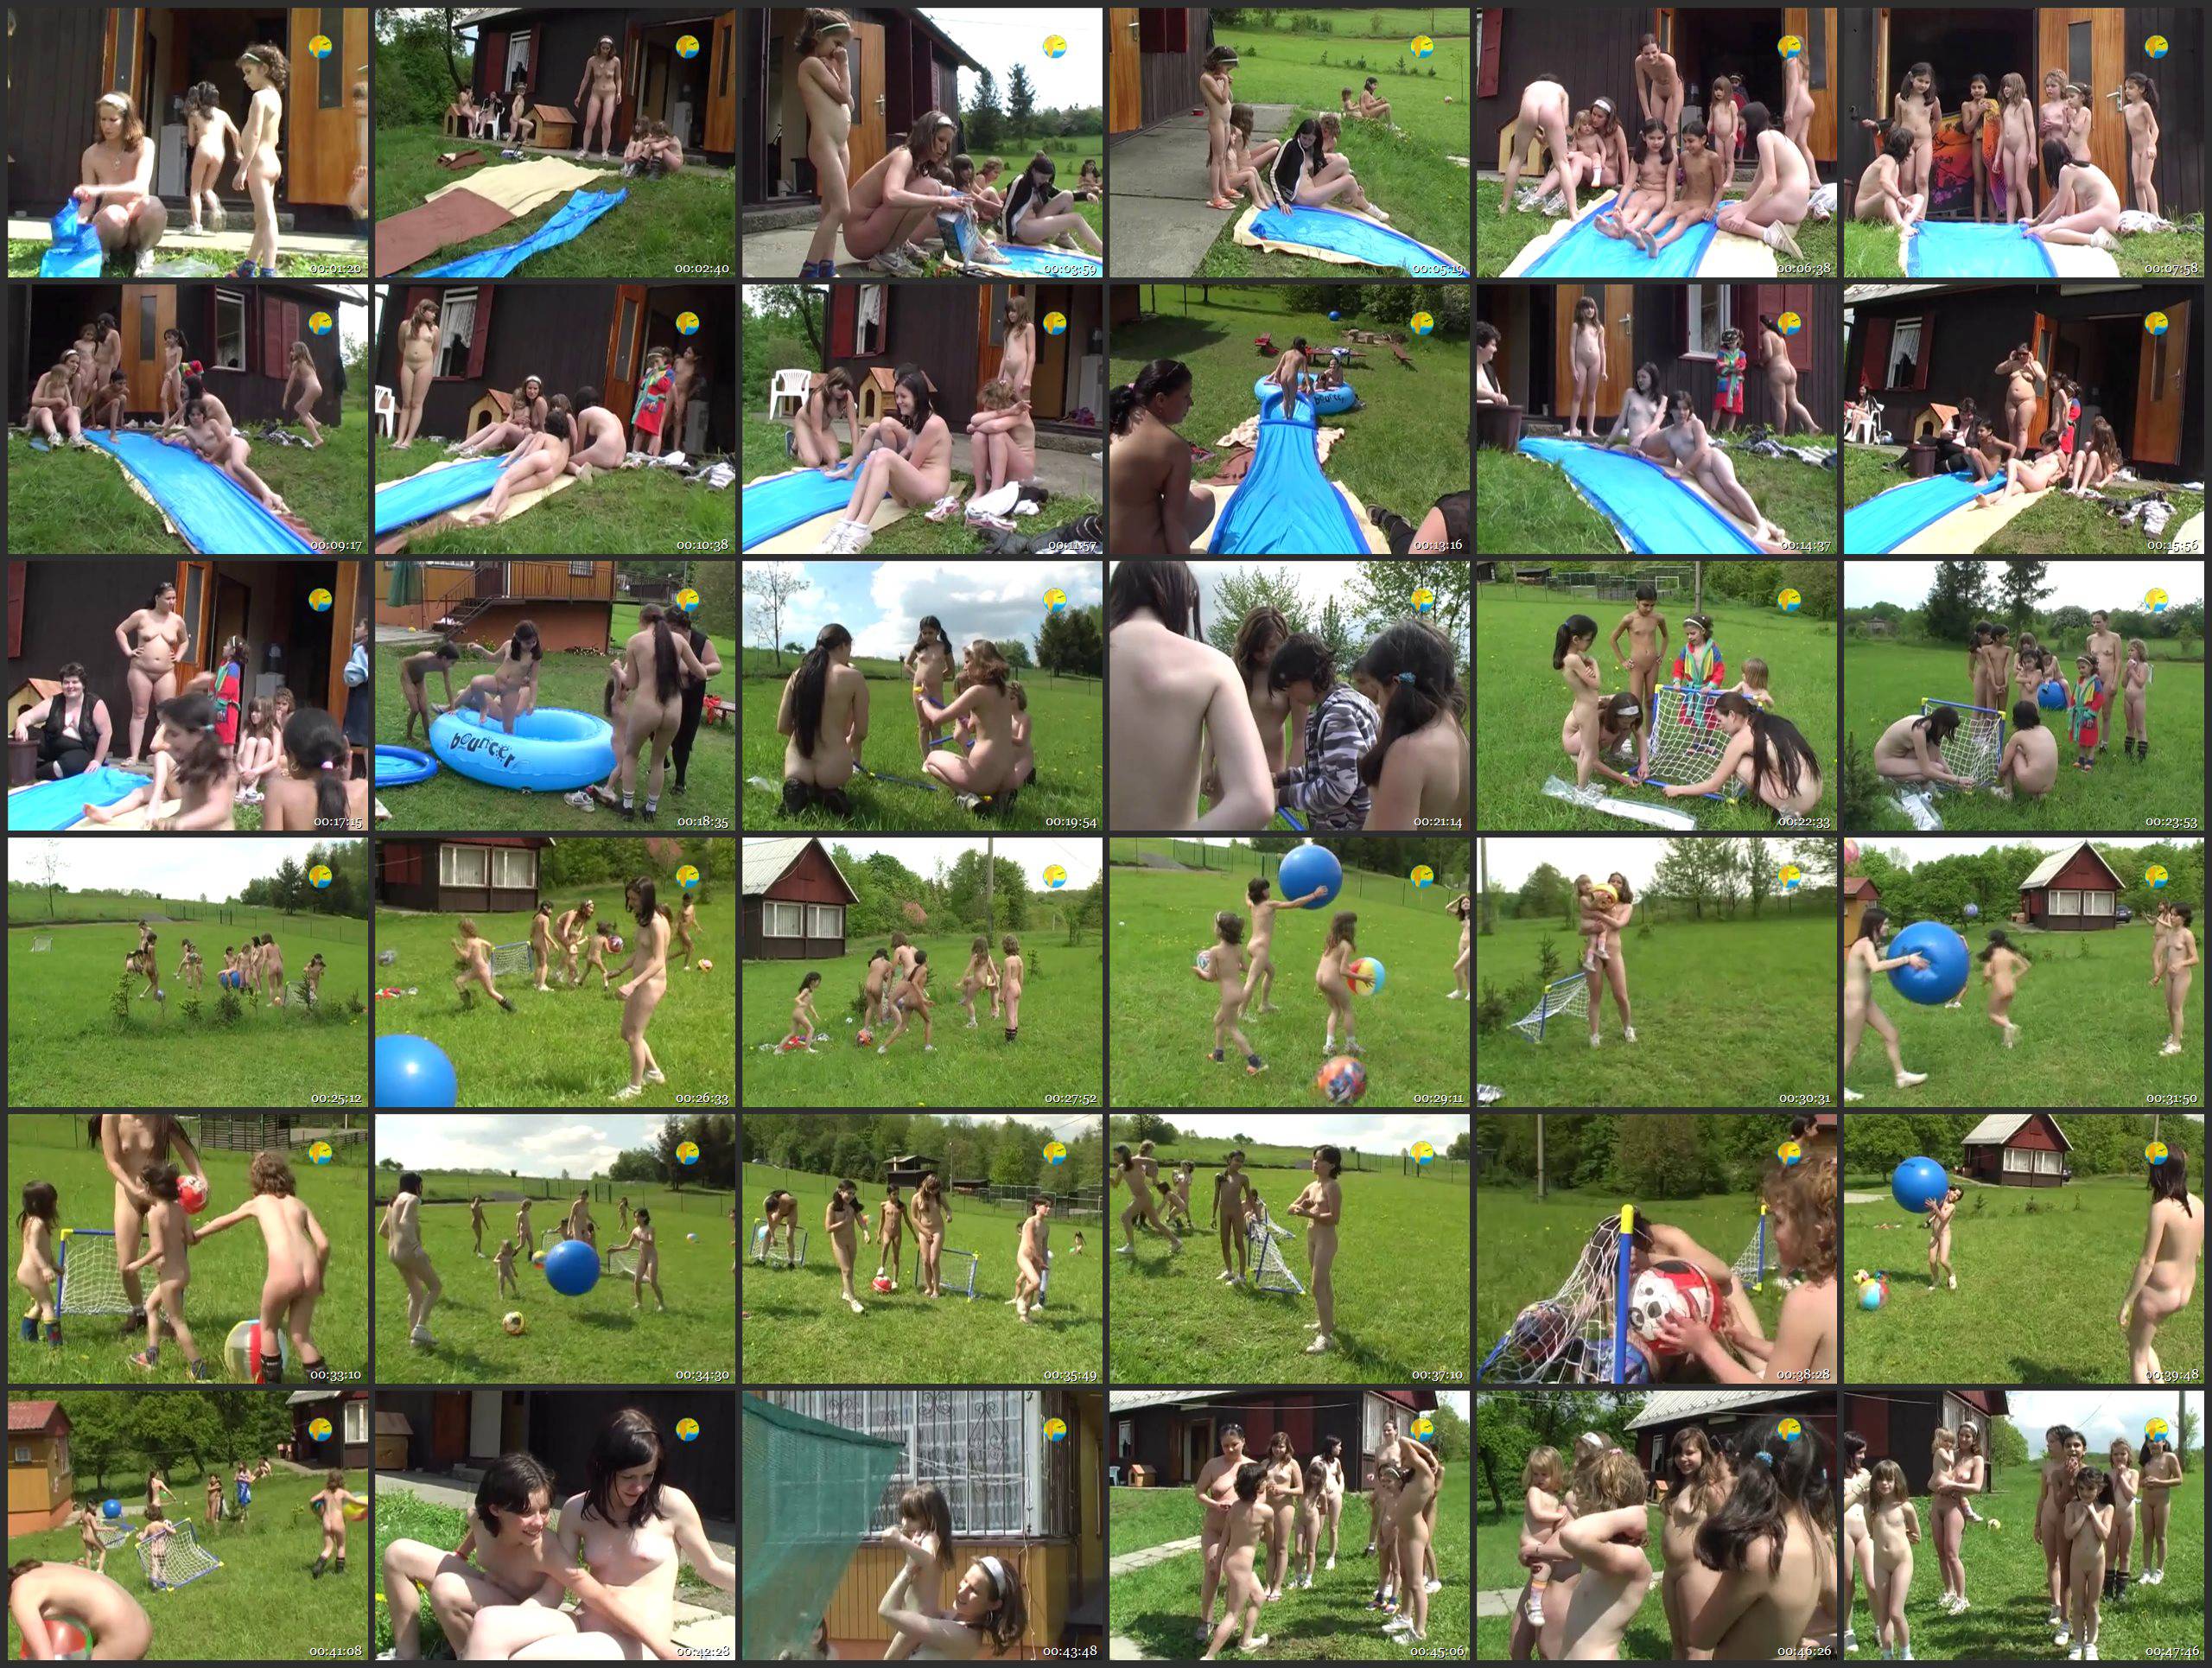 Naturist Freedom Videos Slide in the Summer - Thumbnails